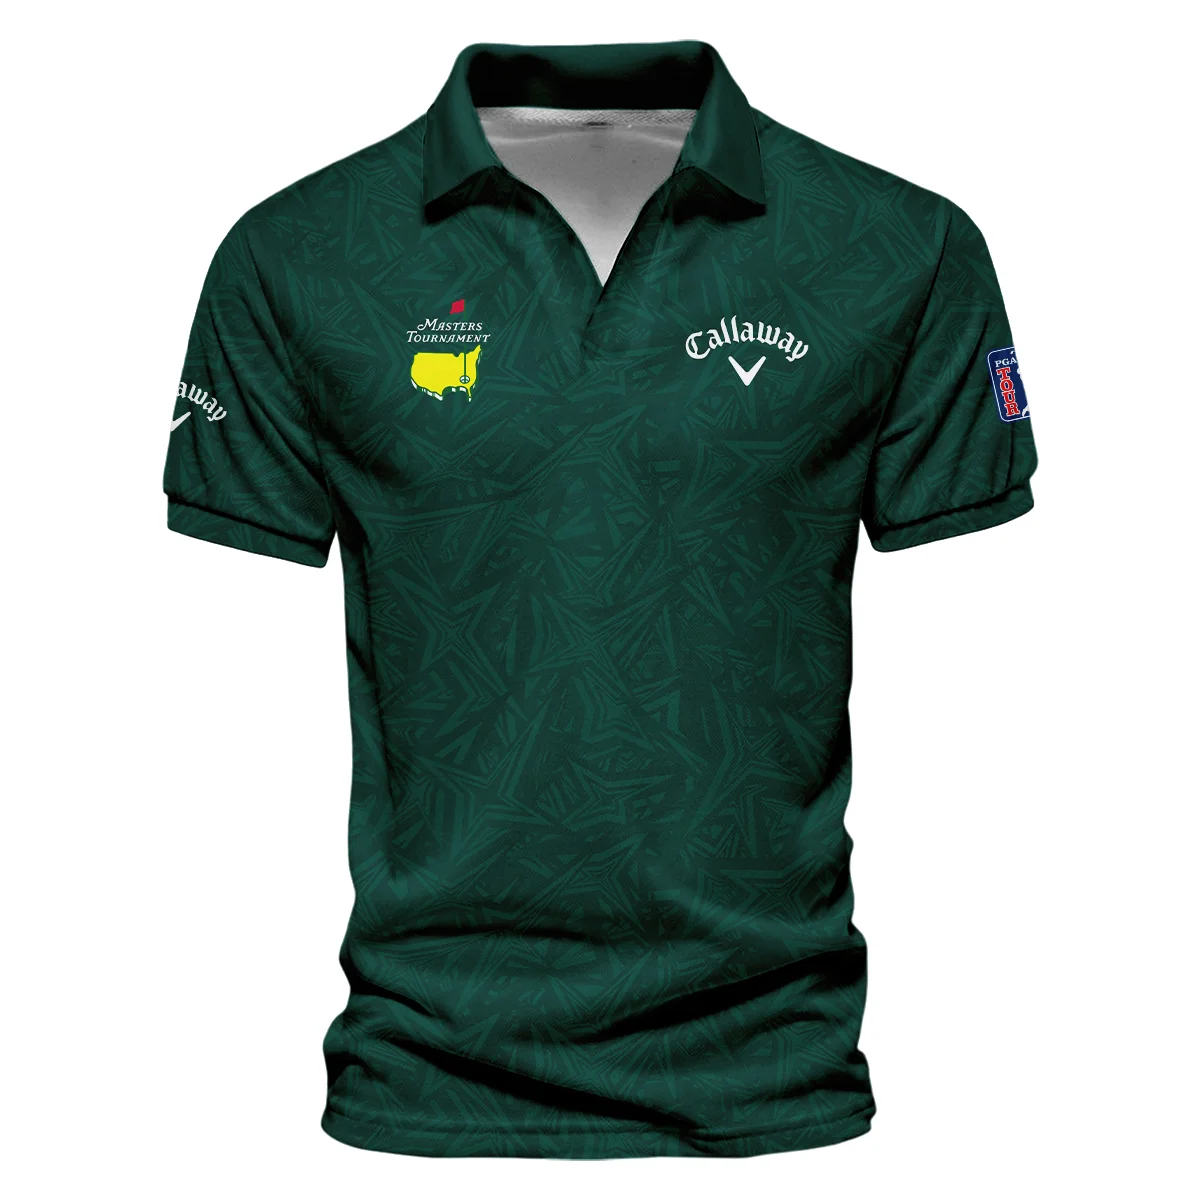 Stars Dark Green Abstract Sport Masters Tournament Callaway Vneck Polo Shirt Style Classic Polo Shirt For Men